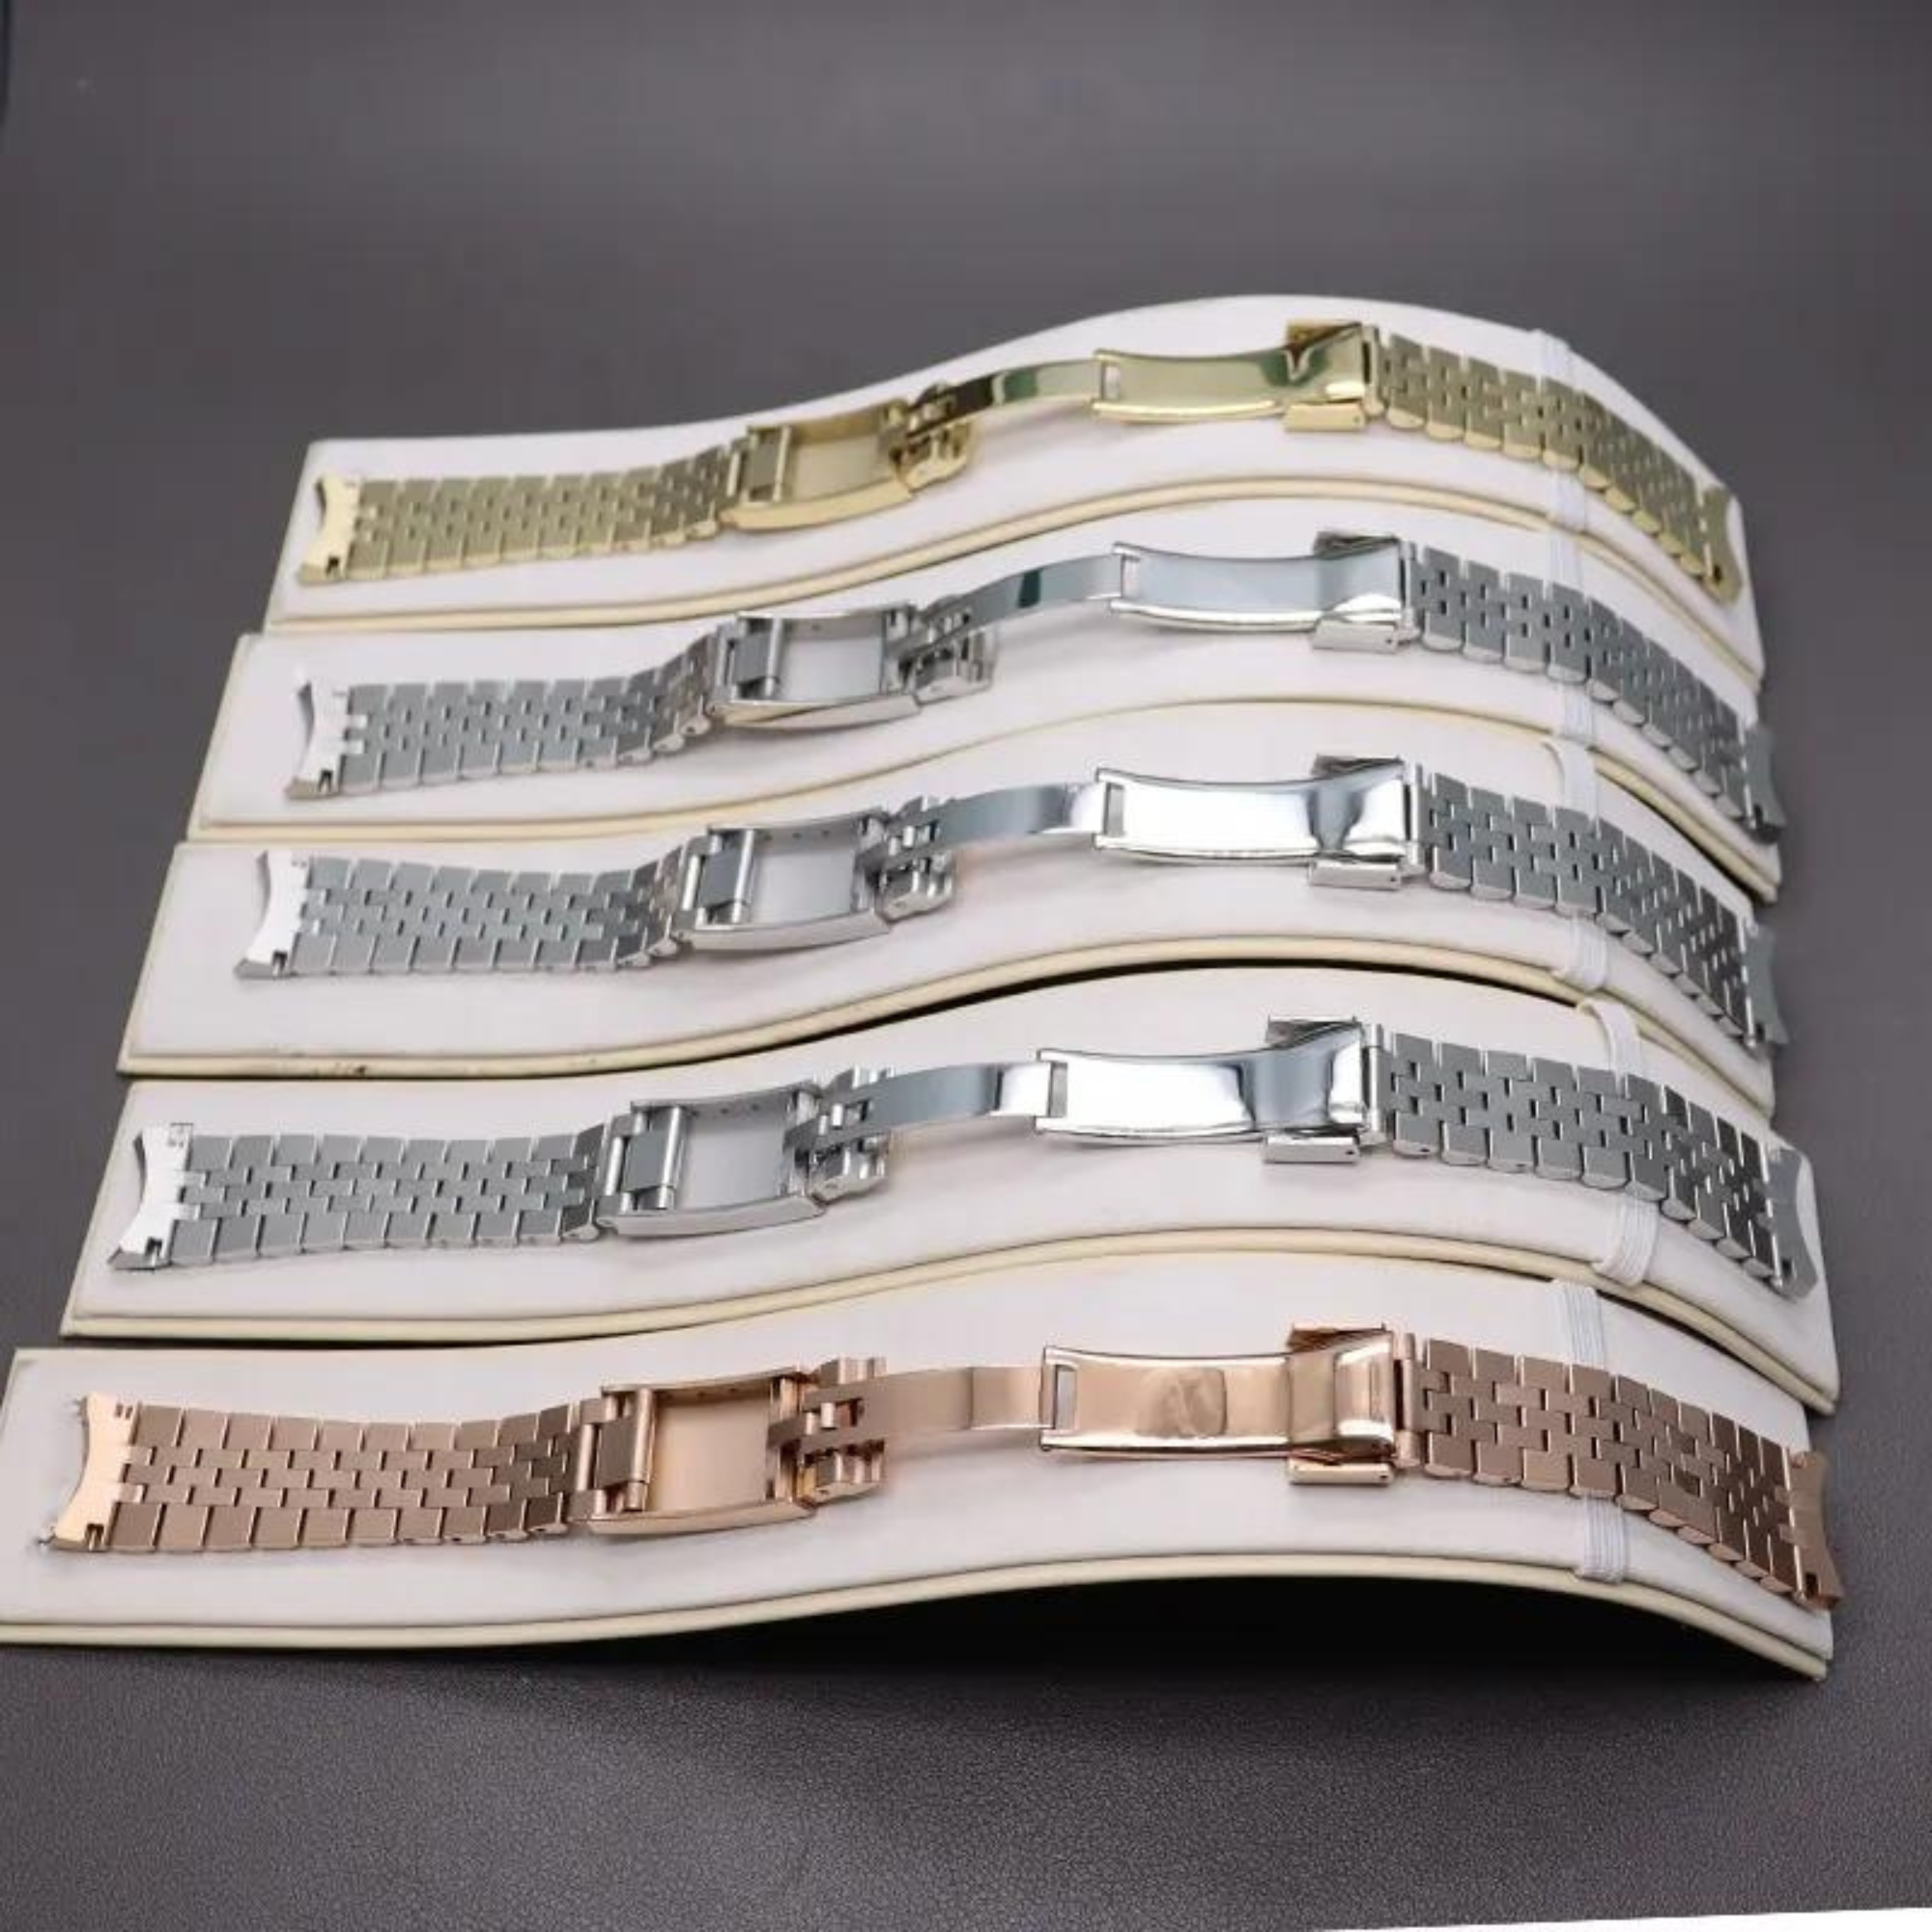 Brushed Silver 22mm Watch Band Stainless Steel Bracelet Watch Strap  Deployment Clasp Mesh Watch Belt for Men Women : SINAIKE: Amazon.in: Watches